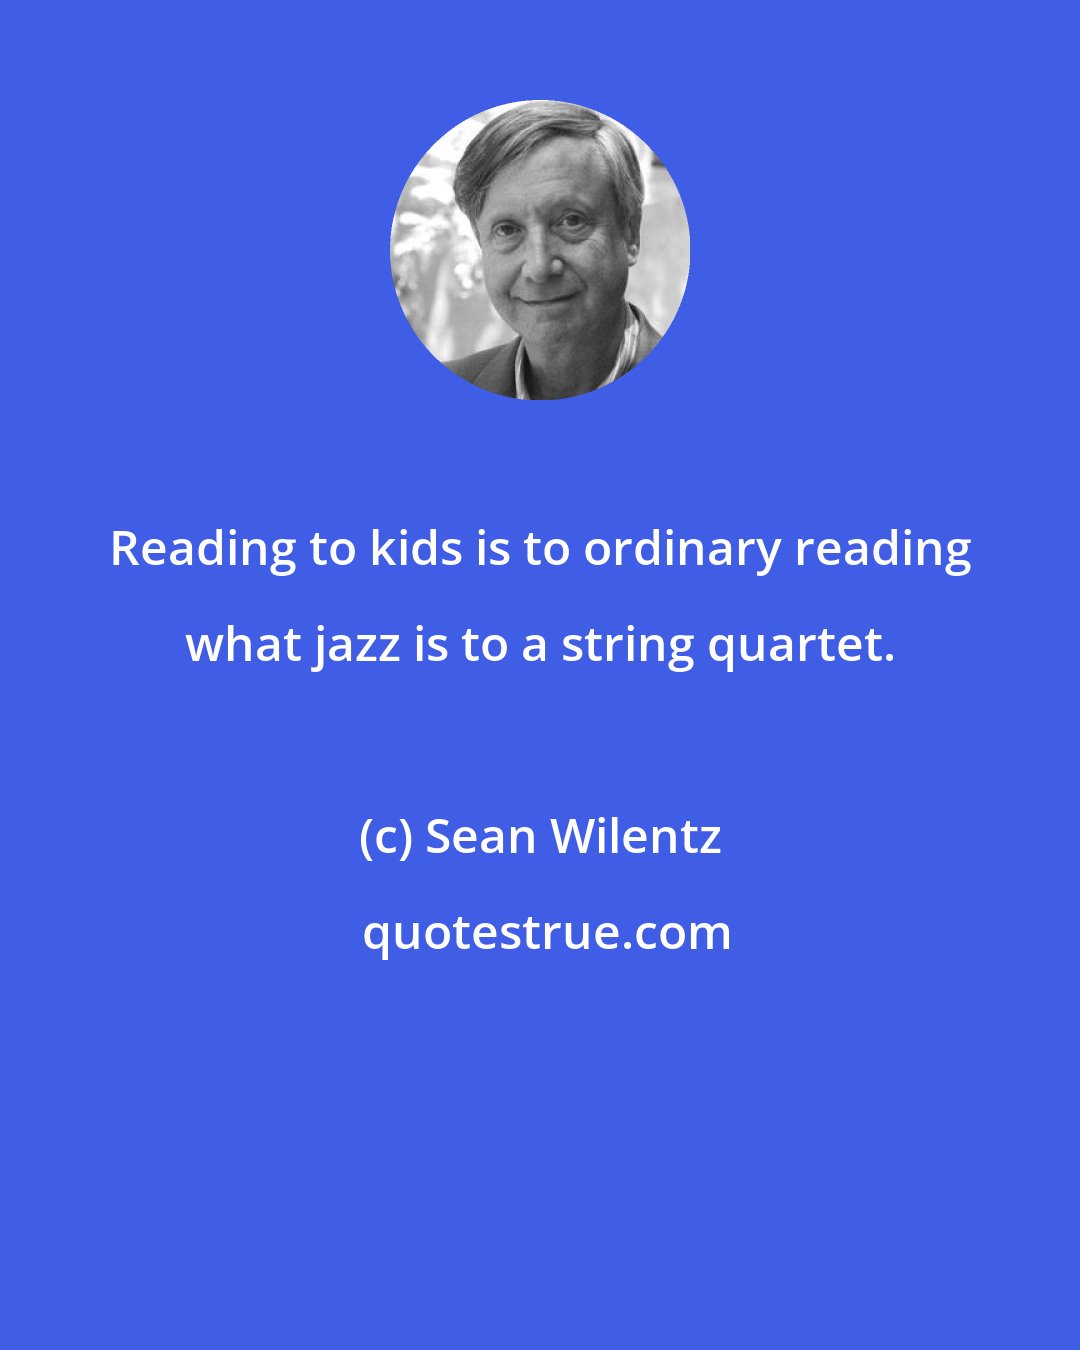 Sean Wilentz: Reading to kids is to ordinary reading what jazz is to a string quartet.